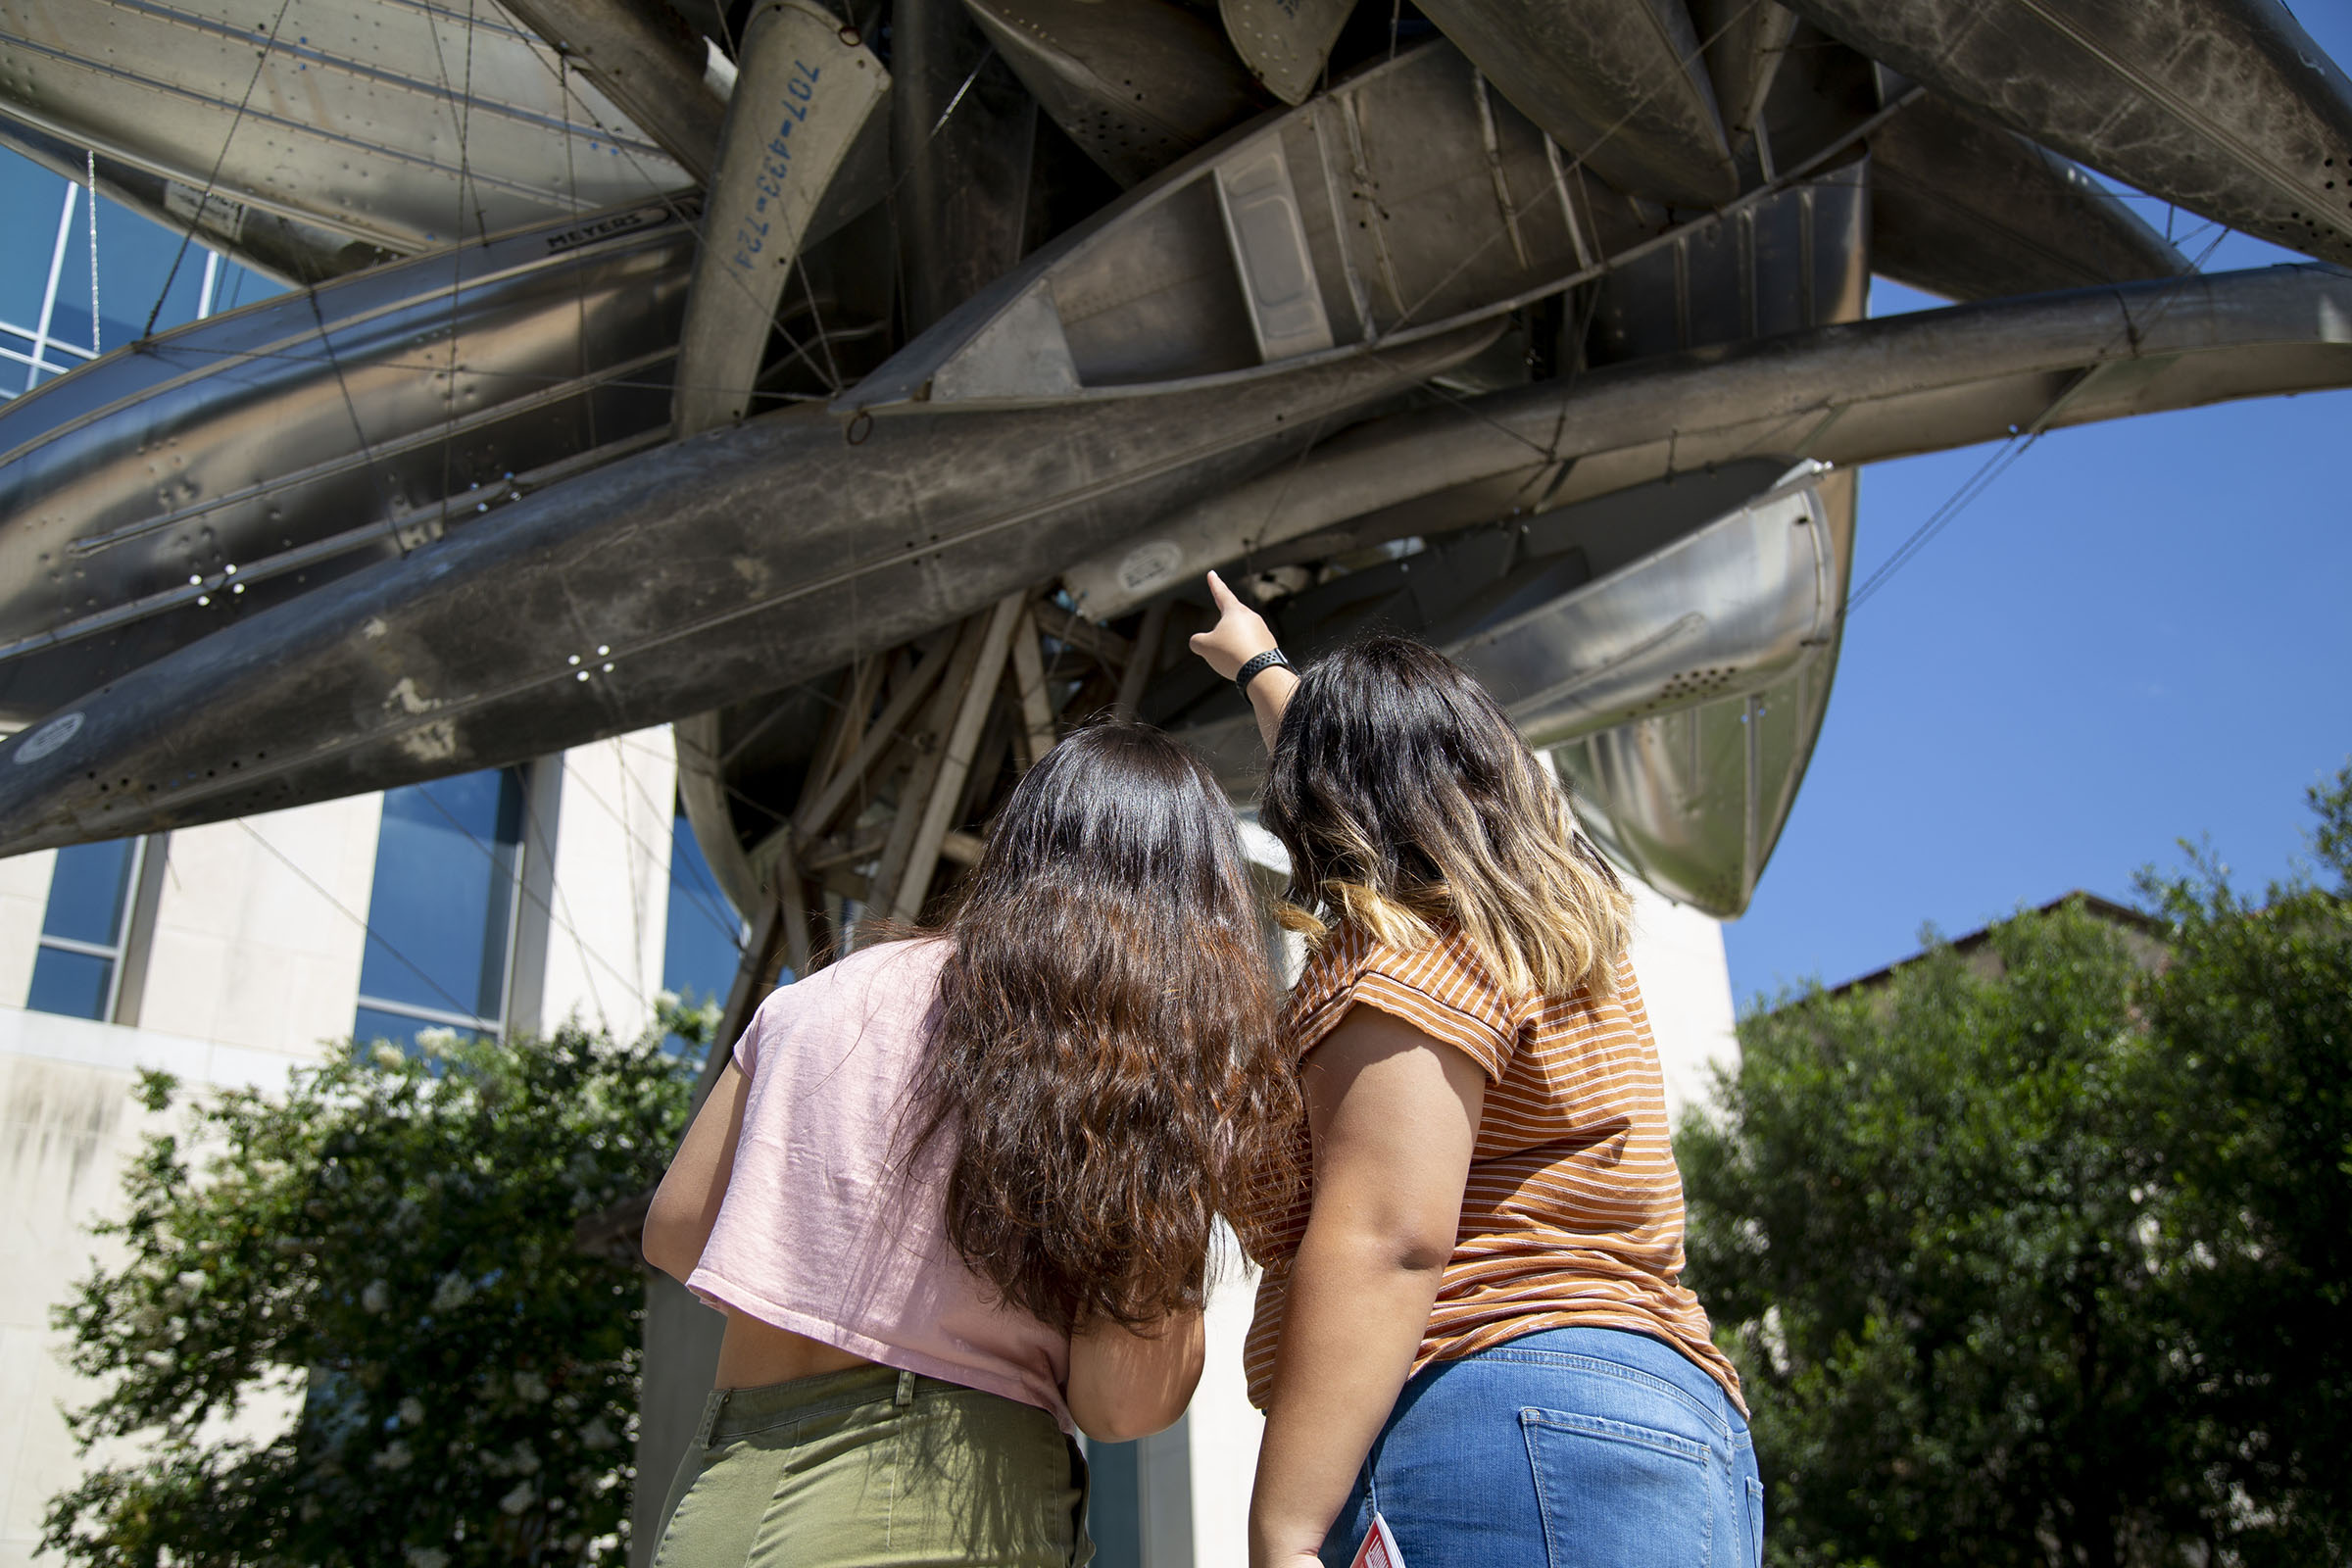 Two women point at a gray metal sculpture from below